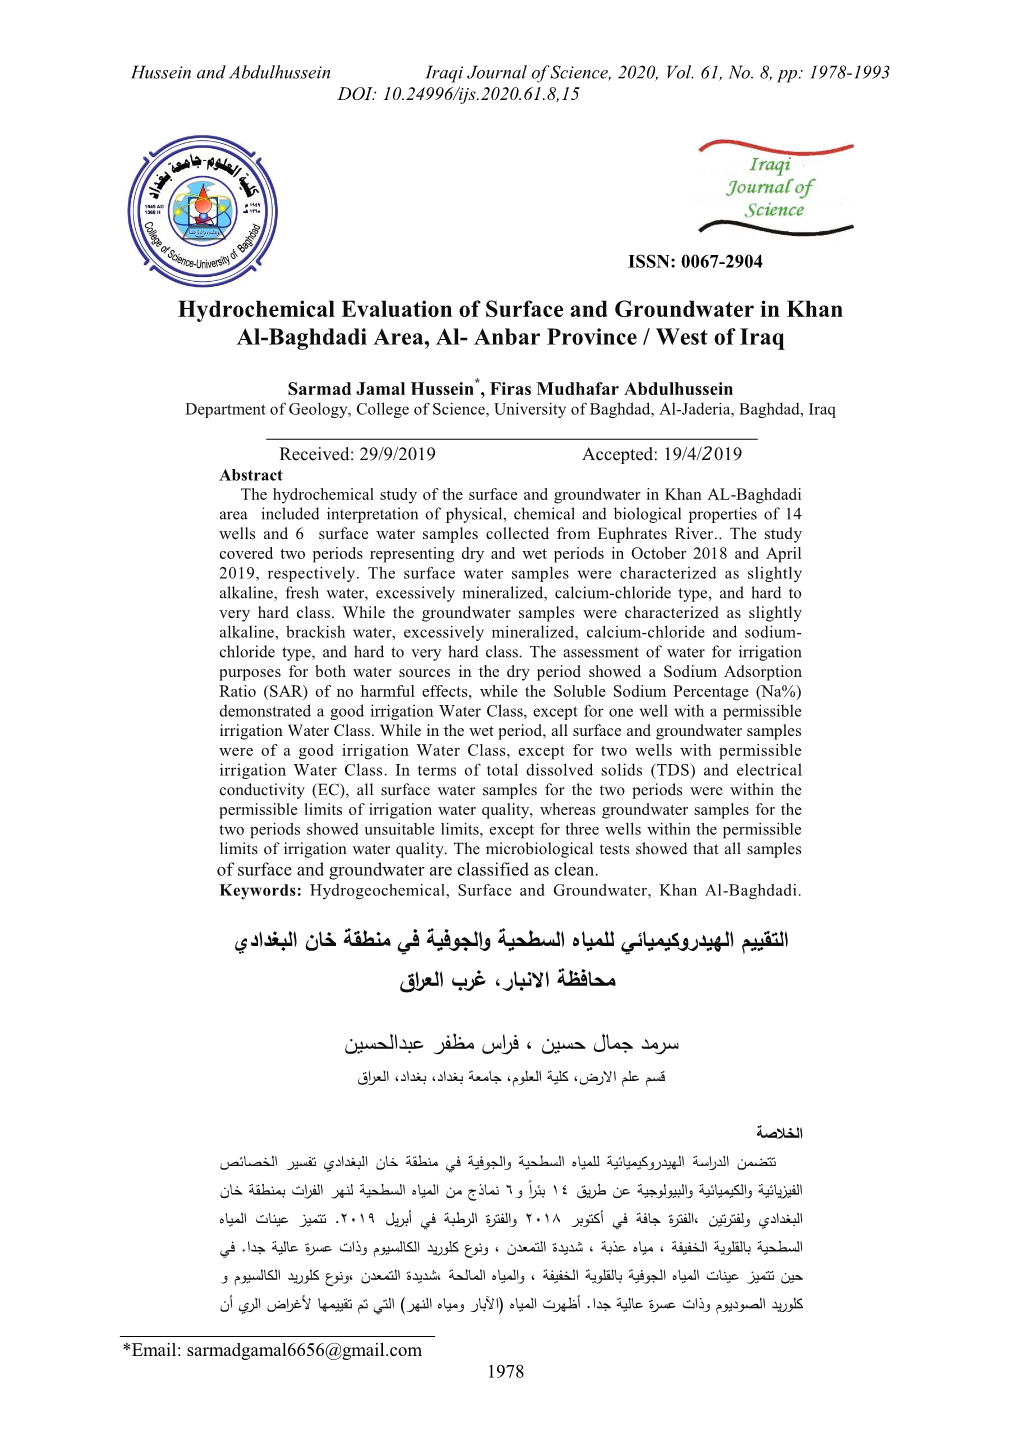 Hydrochemical Evaluation of Surface and Groundwater in Khan Al-Baghdadi Area, Al- Anbar Province / West of Iraq